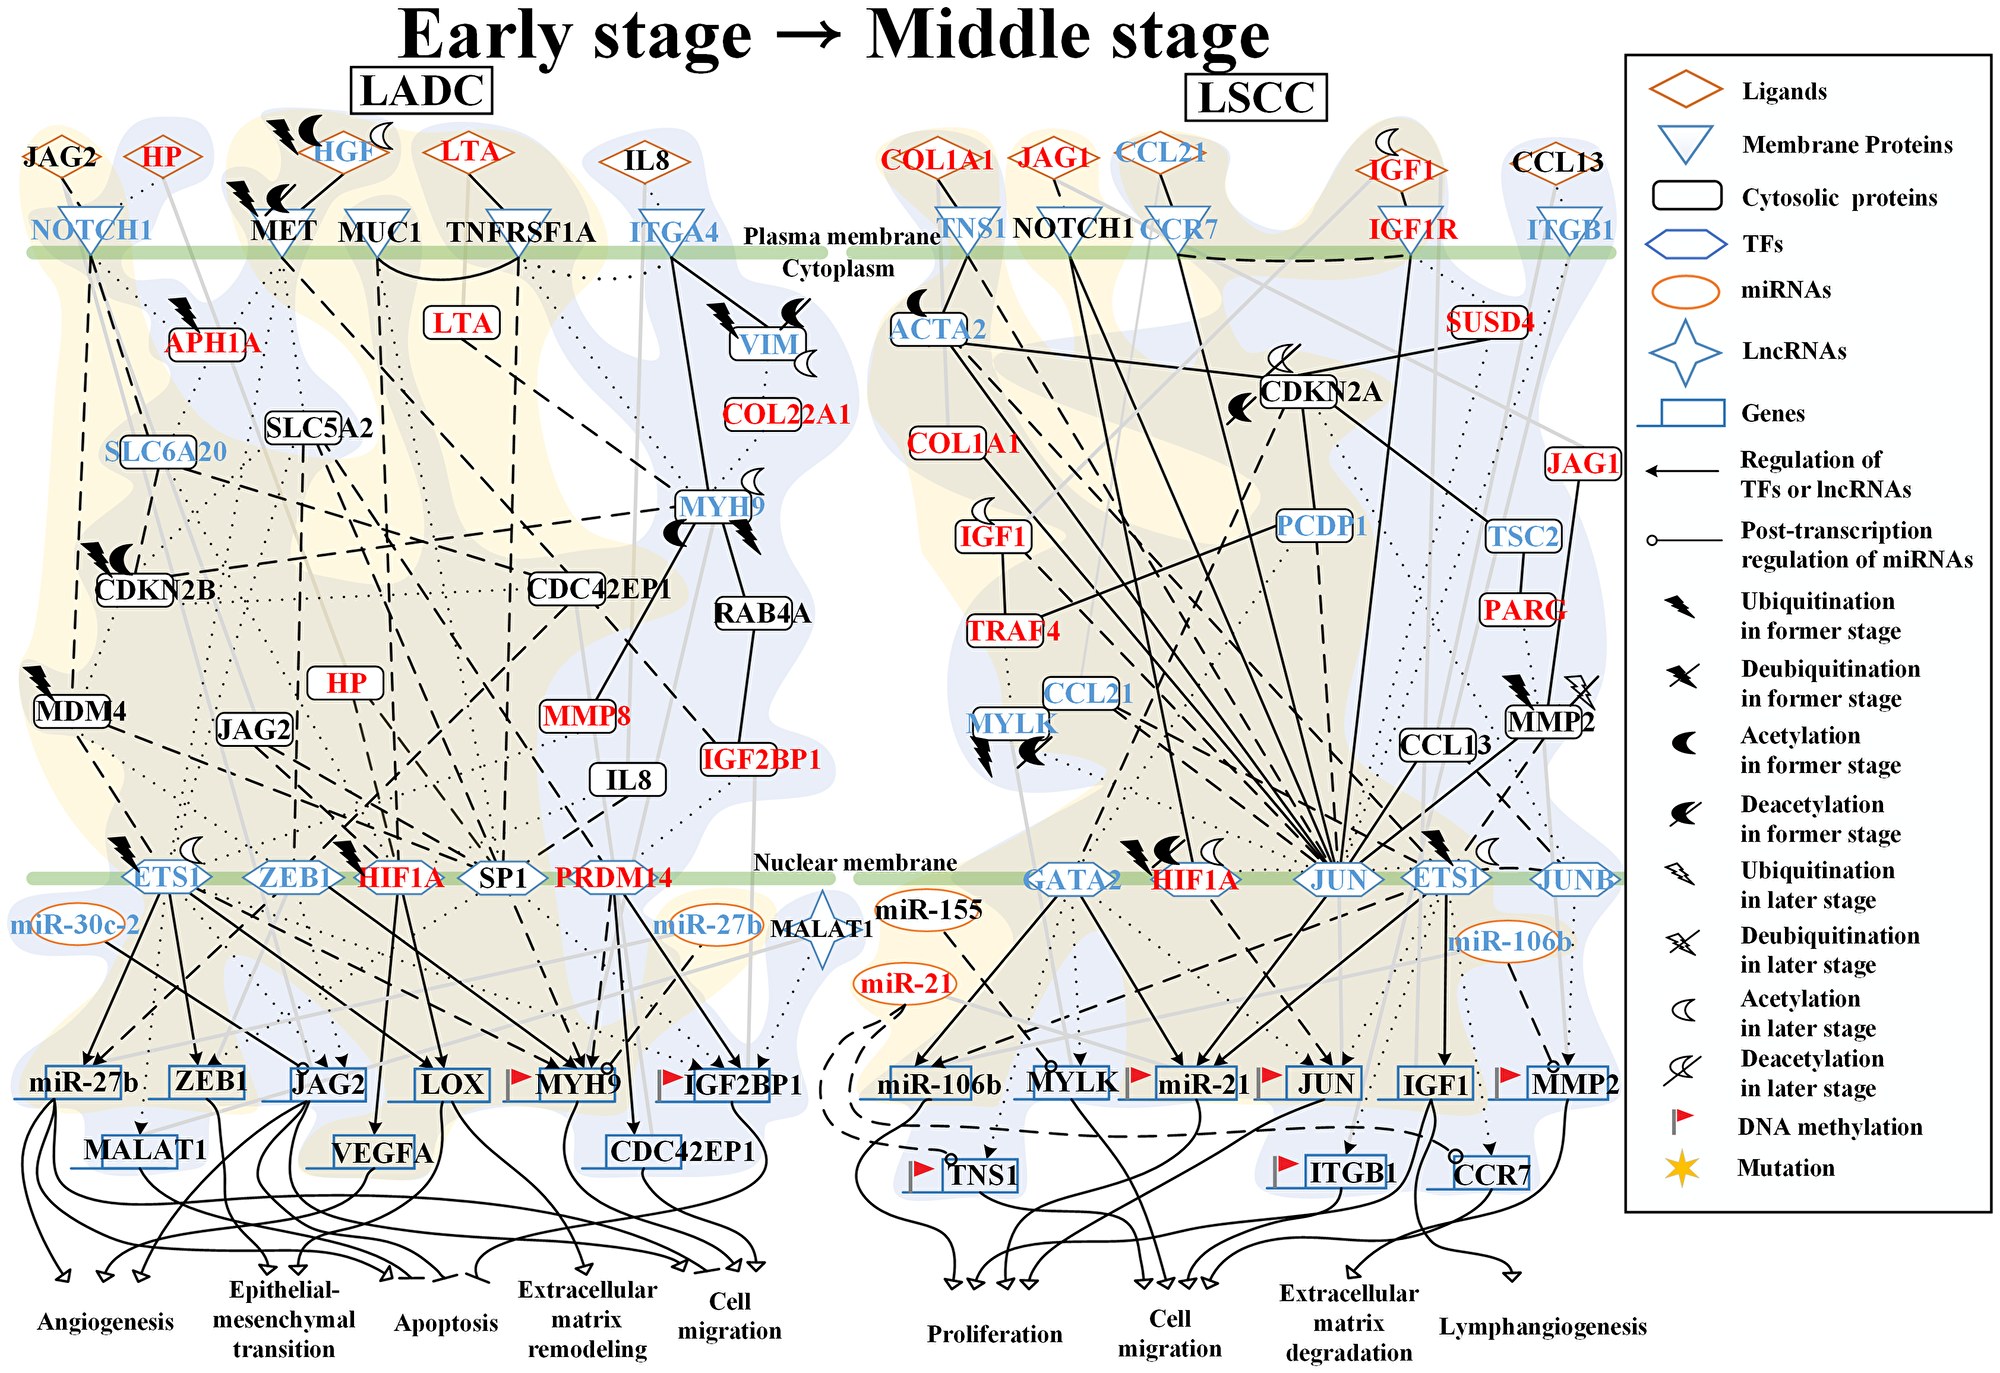 Core signaling pathways extracted from comparing genetic and epigenetic networks (GENs) between early stage and middle stage LADC and LSCC.